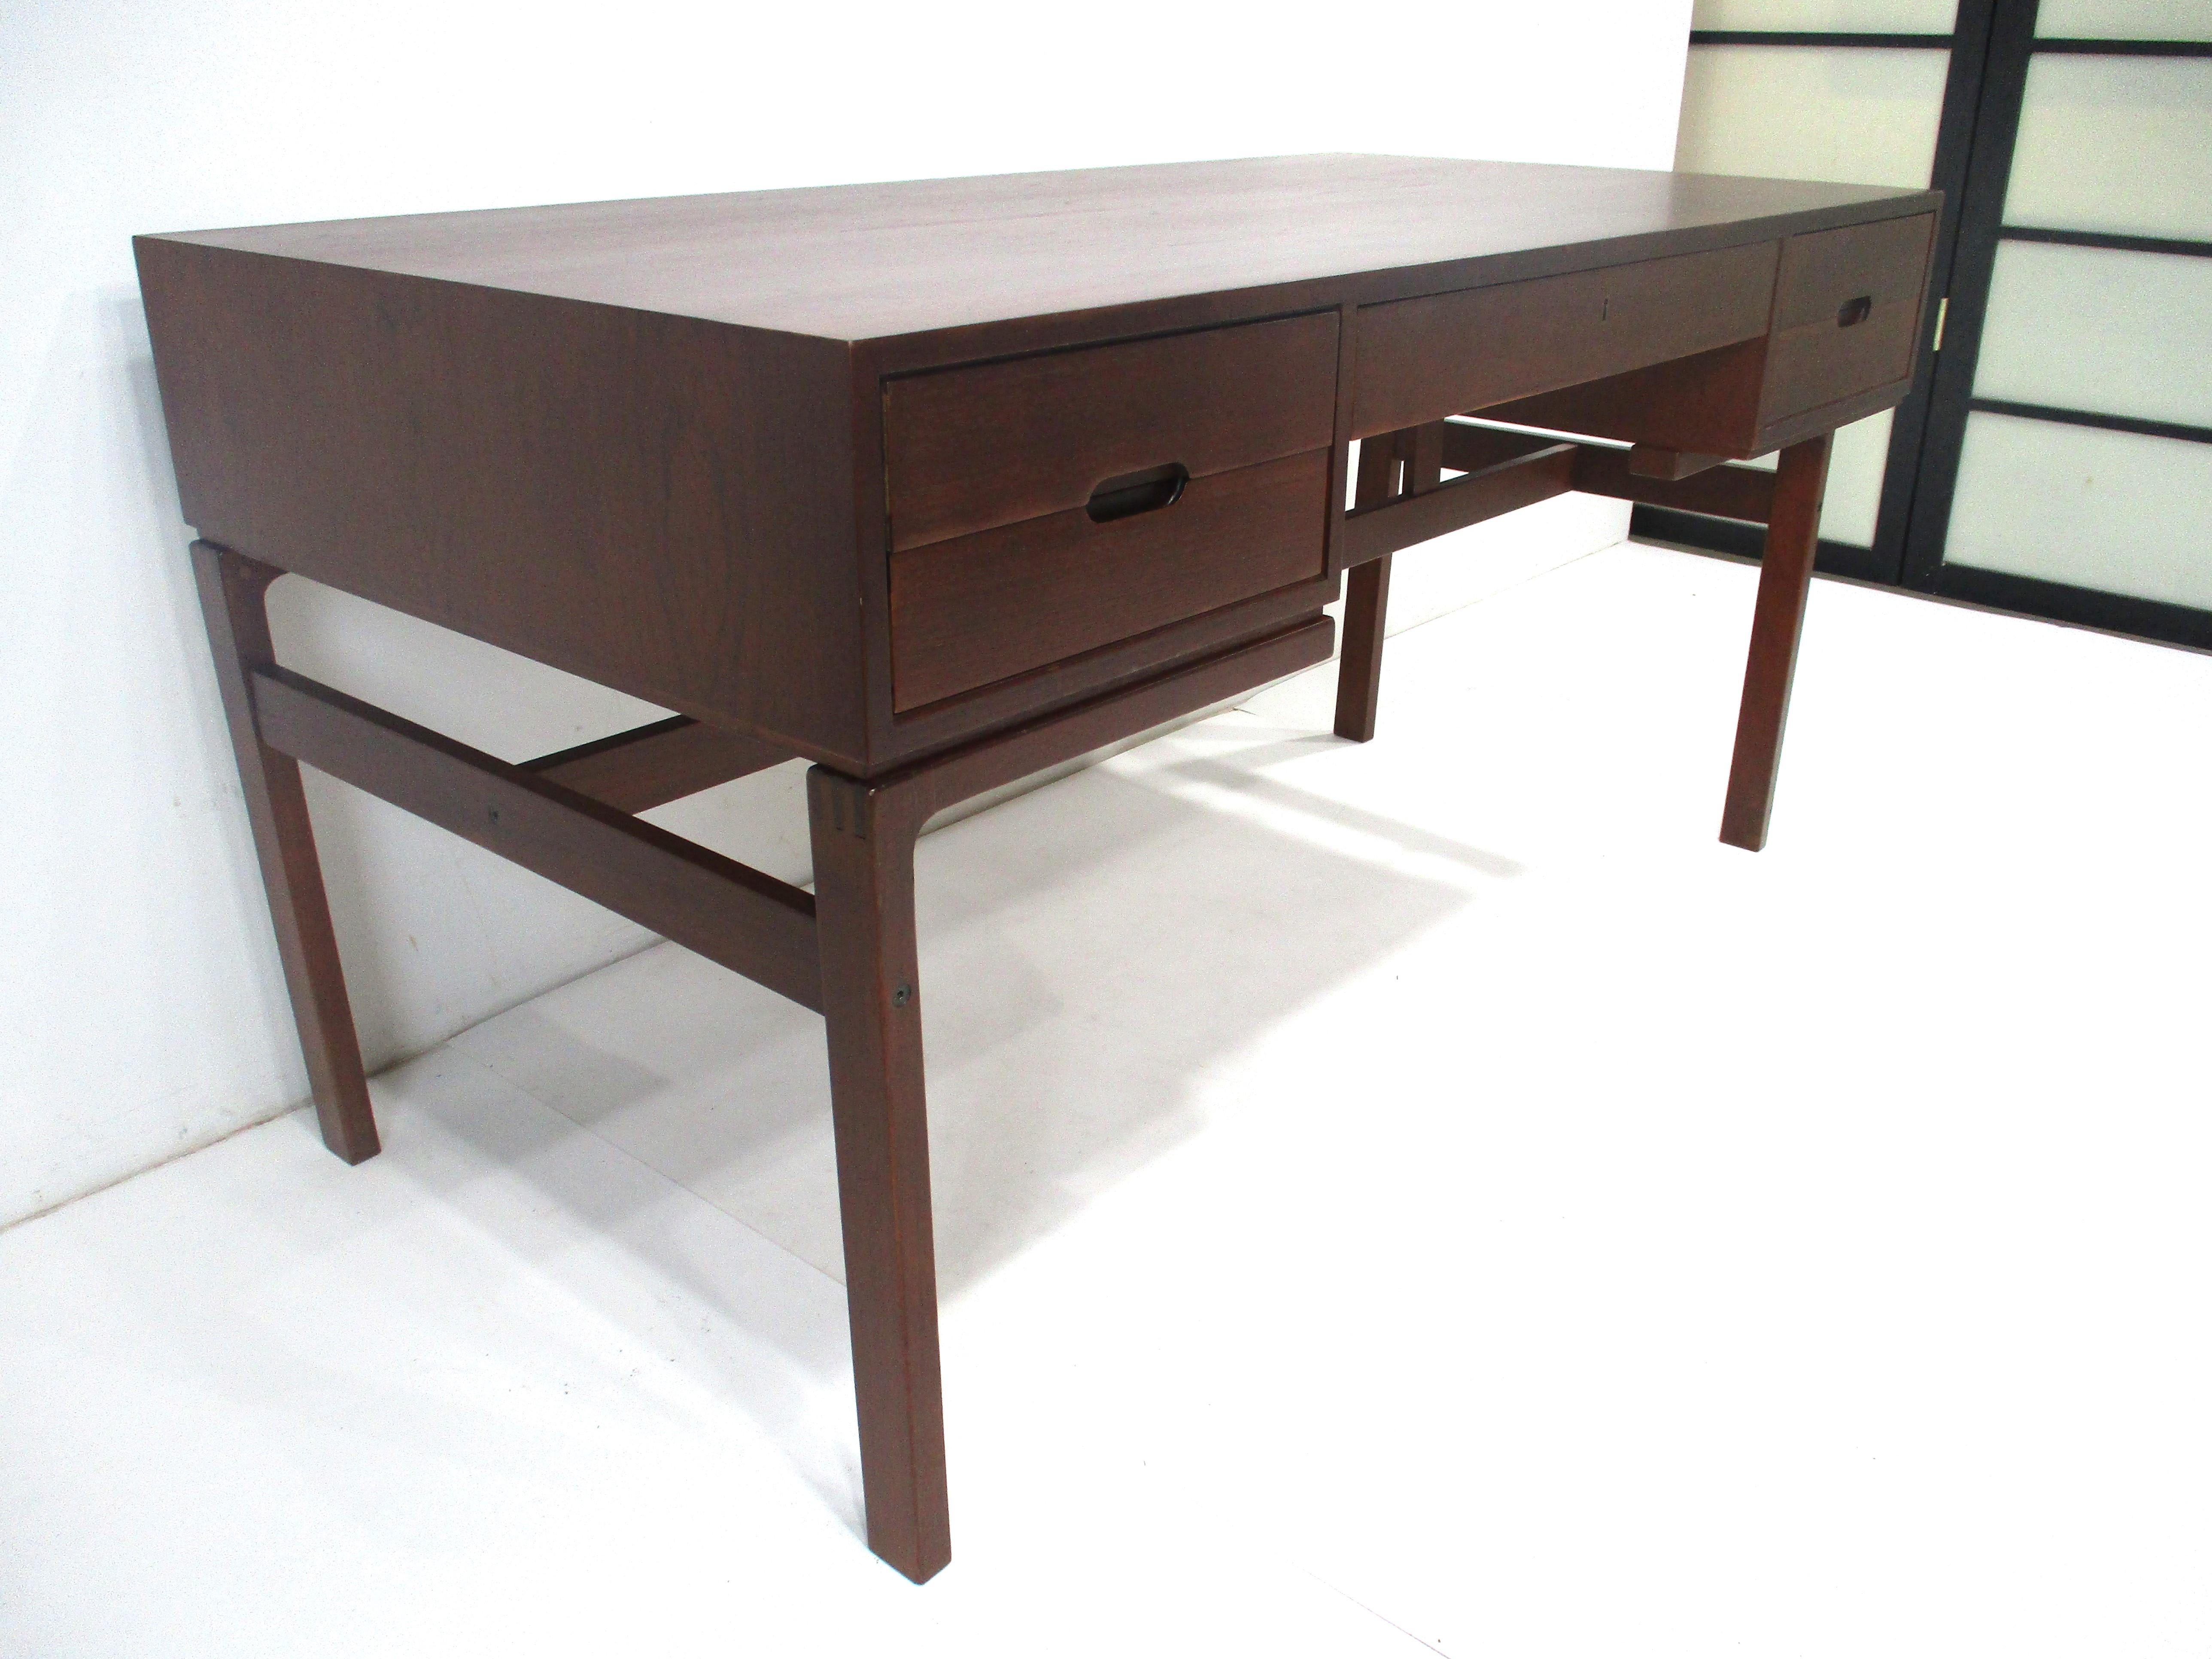 A dark teak desk almost in the tone and rich look of rosewood with two drawers to each side having inset pulls . The center has a slim drawer and the backside of the desk has two open storage areas and H type legs but one side has a shorter width or